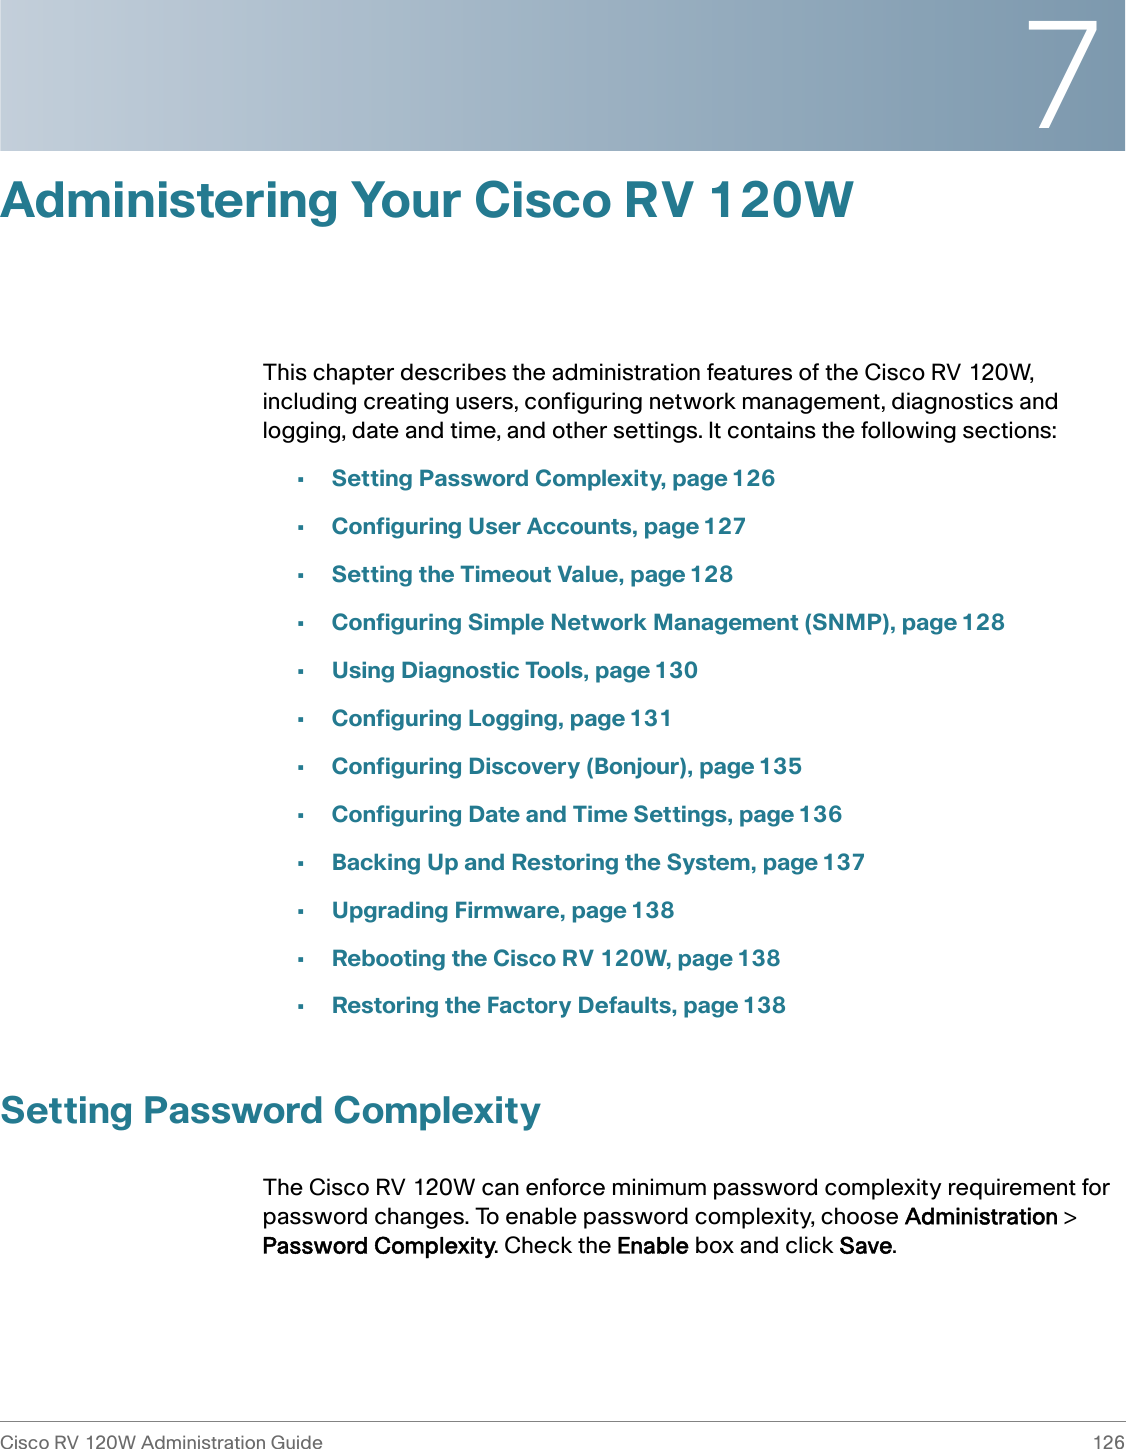 7Cisco RV 120W Administration Guide 126 Administering Your Cisco RV 120WThis chapter describes the administration features of the Cisco RV 120W, including creating users, configuring network management, diagnostics and logging, date and time, and other settings. It contains the following sections:•Setting Password Complexity, page 126•Configuring User Accounts, page 127•Setting the Timeout Value, page 128•Configuring Simple Network Management (SNMP), page 128•Using Diagnostic Tools, page 130•Configuring Logging, page 131•Configuring Discovery (Bonjour), page 135•Configuring Date and Time Settings, page 136•Backing Up and Restoring the System, page 137•Upgrading Firmware, page 138•Rebooting the Cisco RV 120W, page 138•Restoring the Factory Defaults, page 138Setting Password ComplexityThe Cisco RV 120W can enforce minimum password complexity requirement for password changes. To enable password complexity, choose Administration &gt; Password Complexity. Check the Enable box and click Save. 